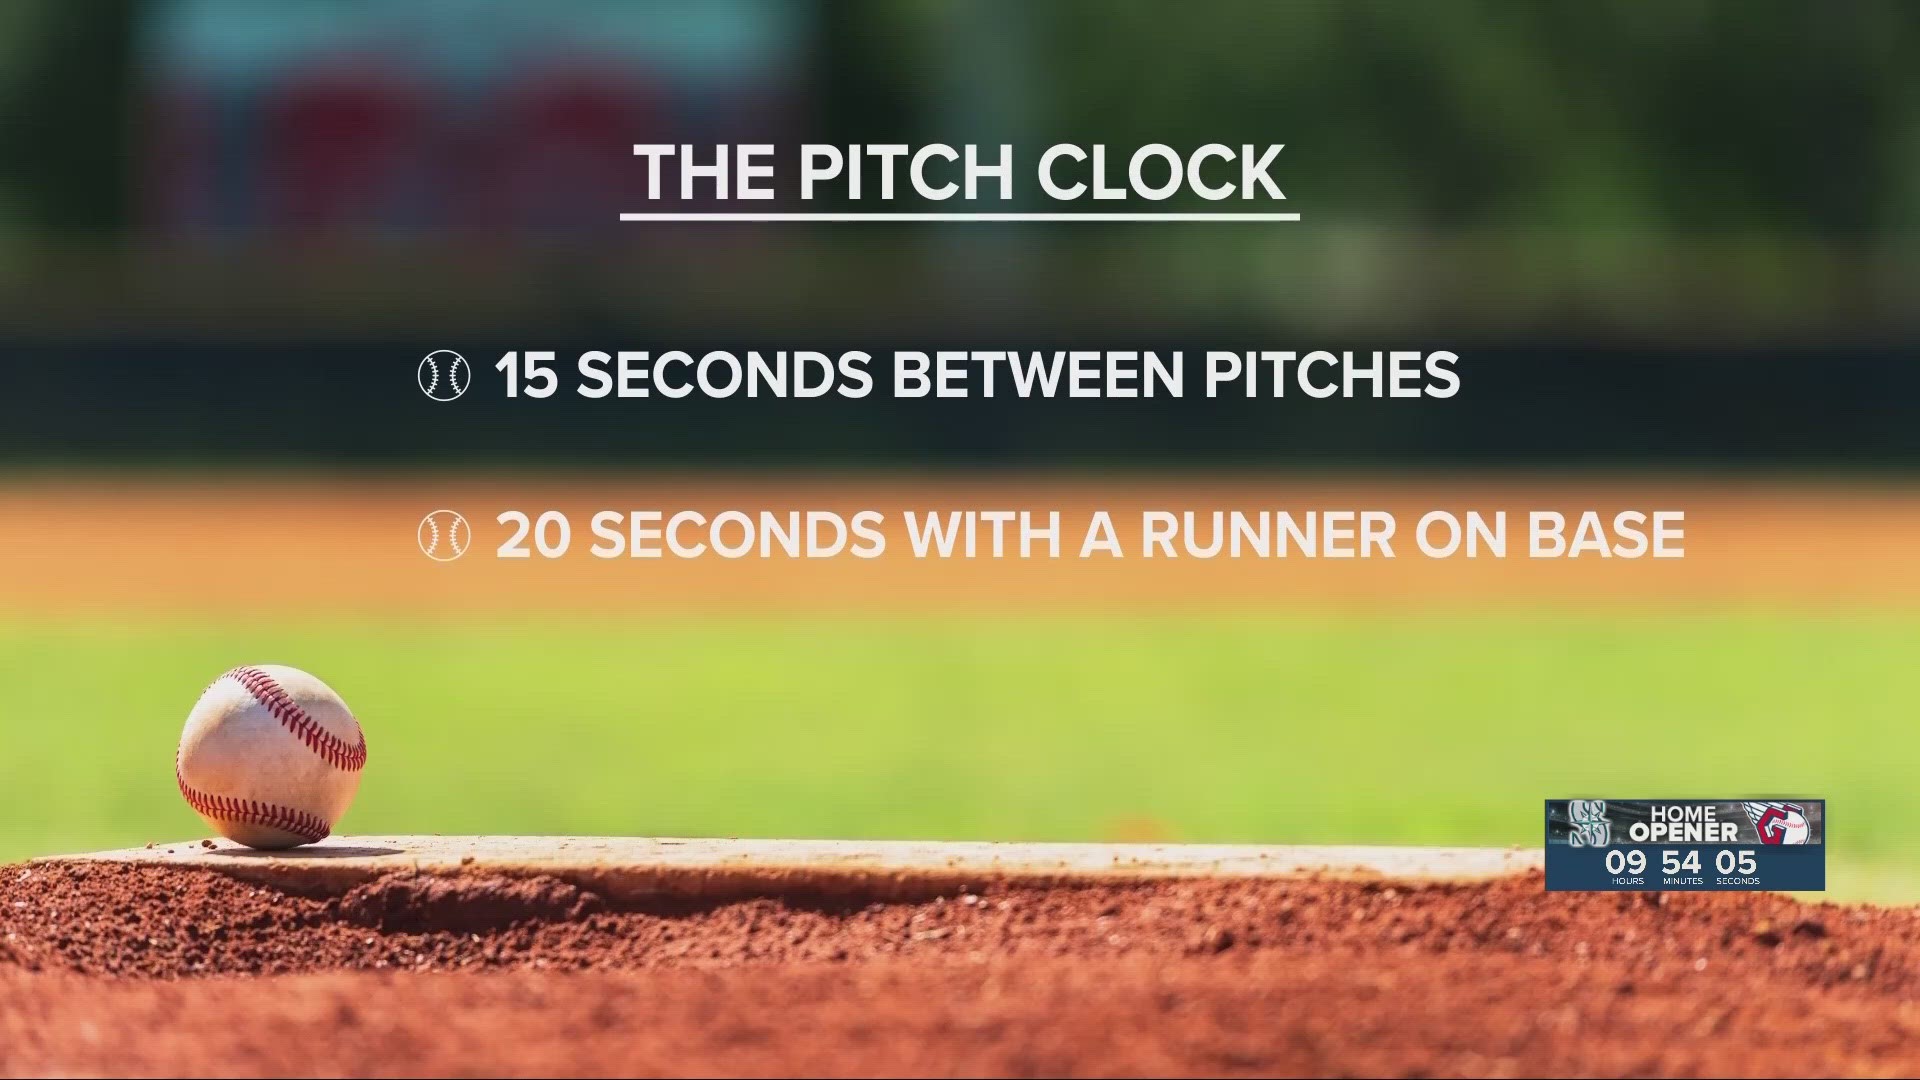 MLB decides to keep pitch clock rules in place for upcoming